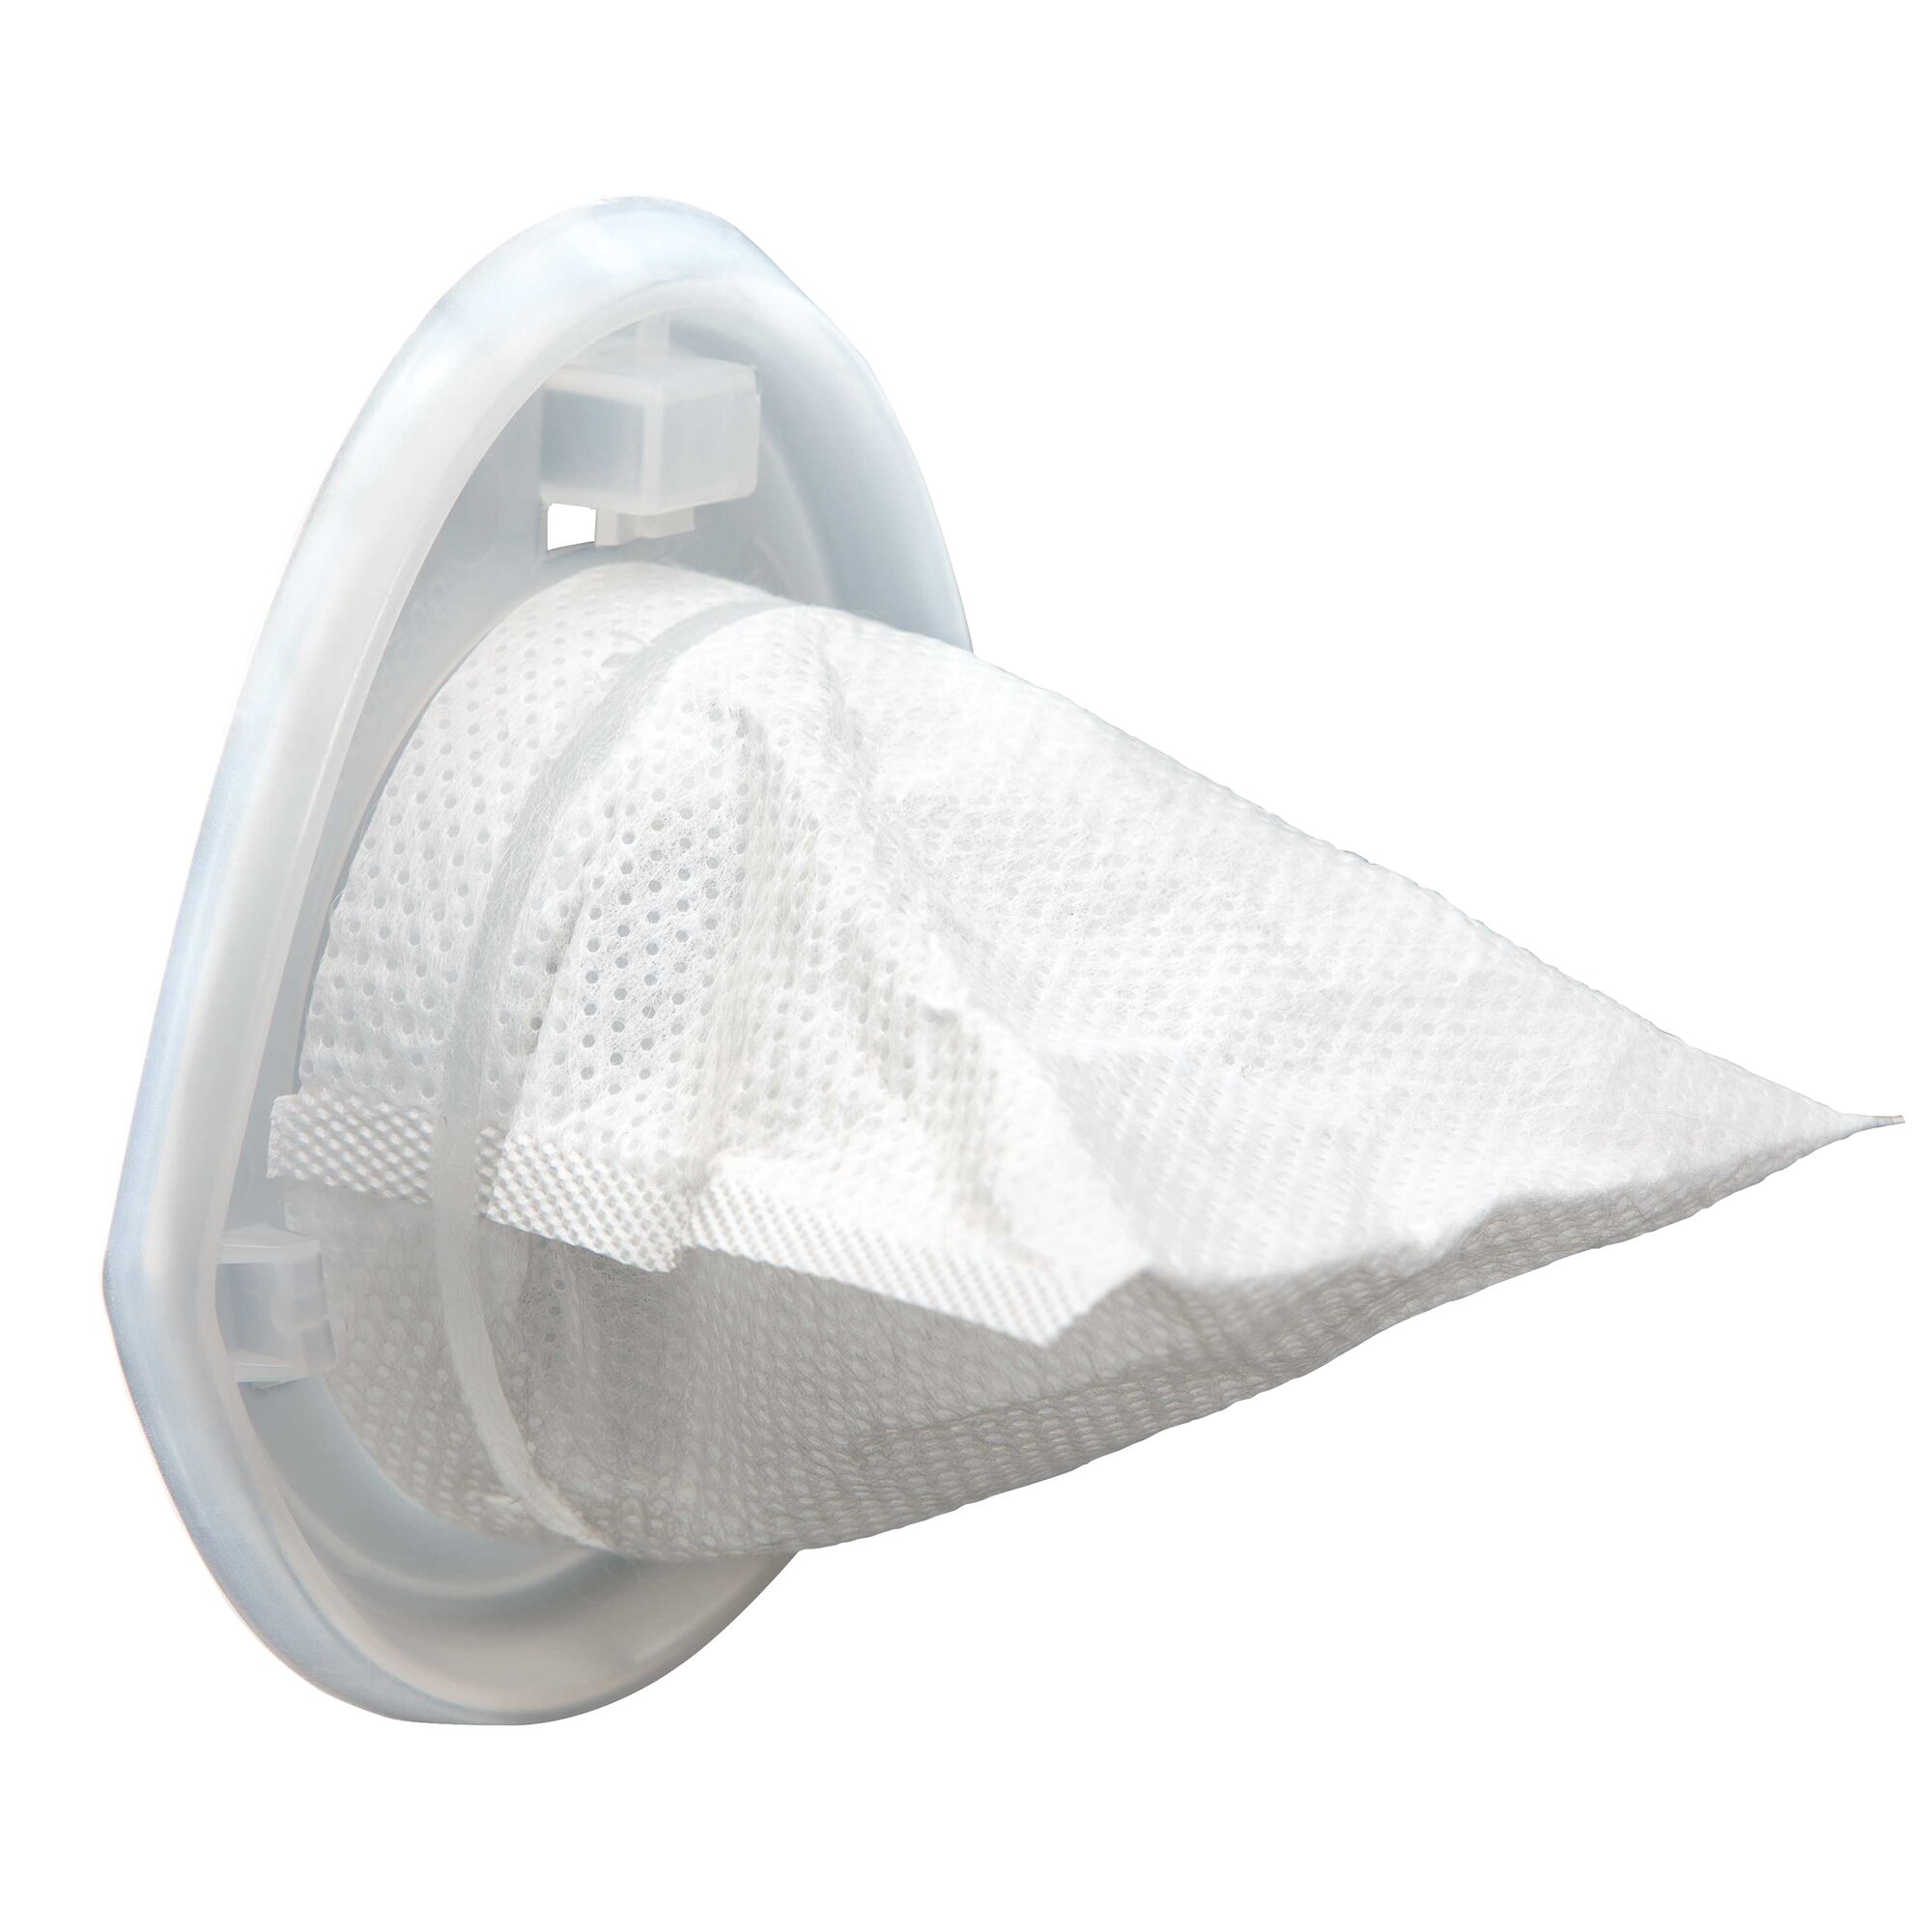 Profile of dustbuster cordless hand vacuum replacement filter.